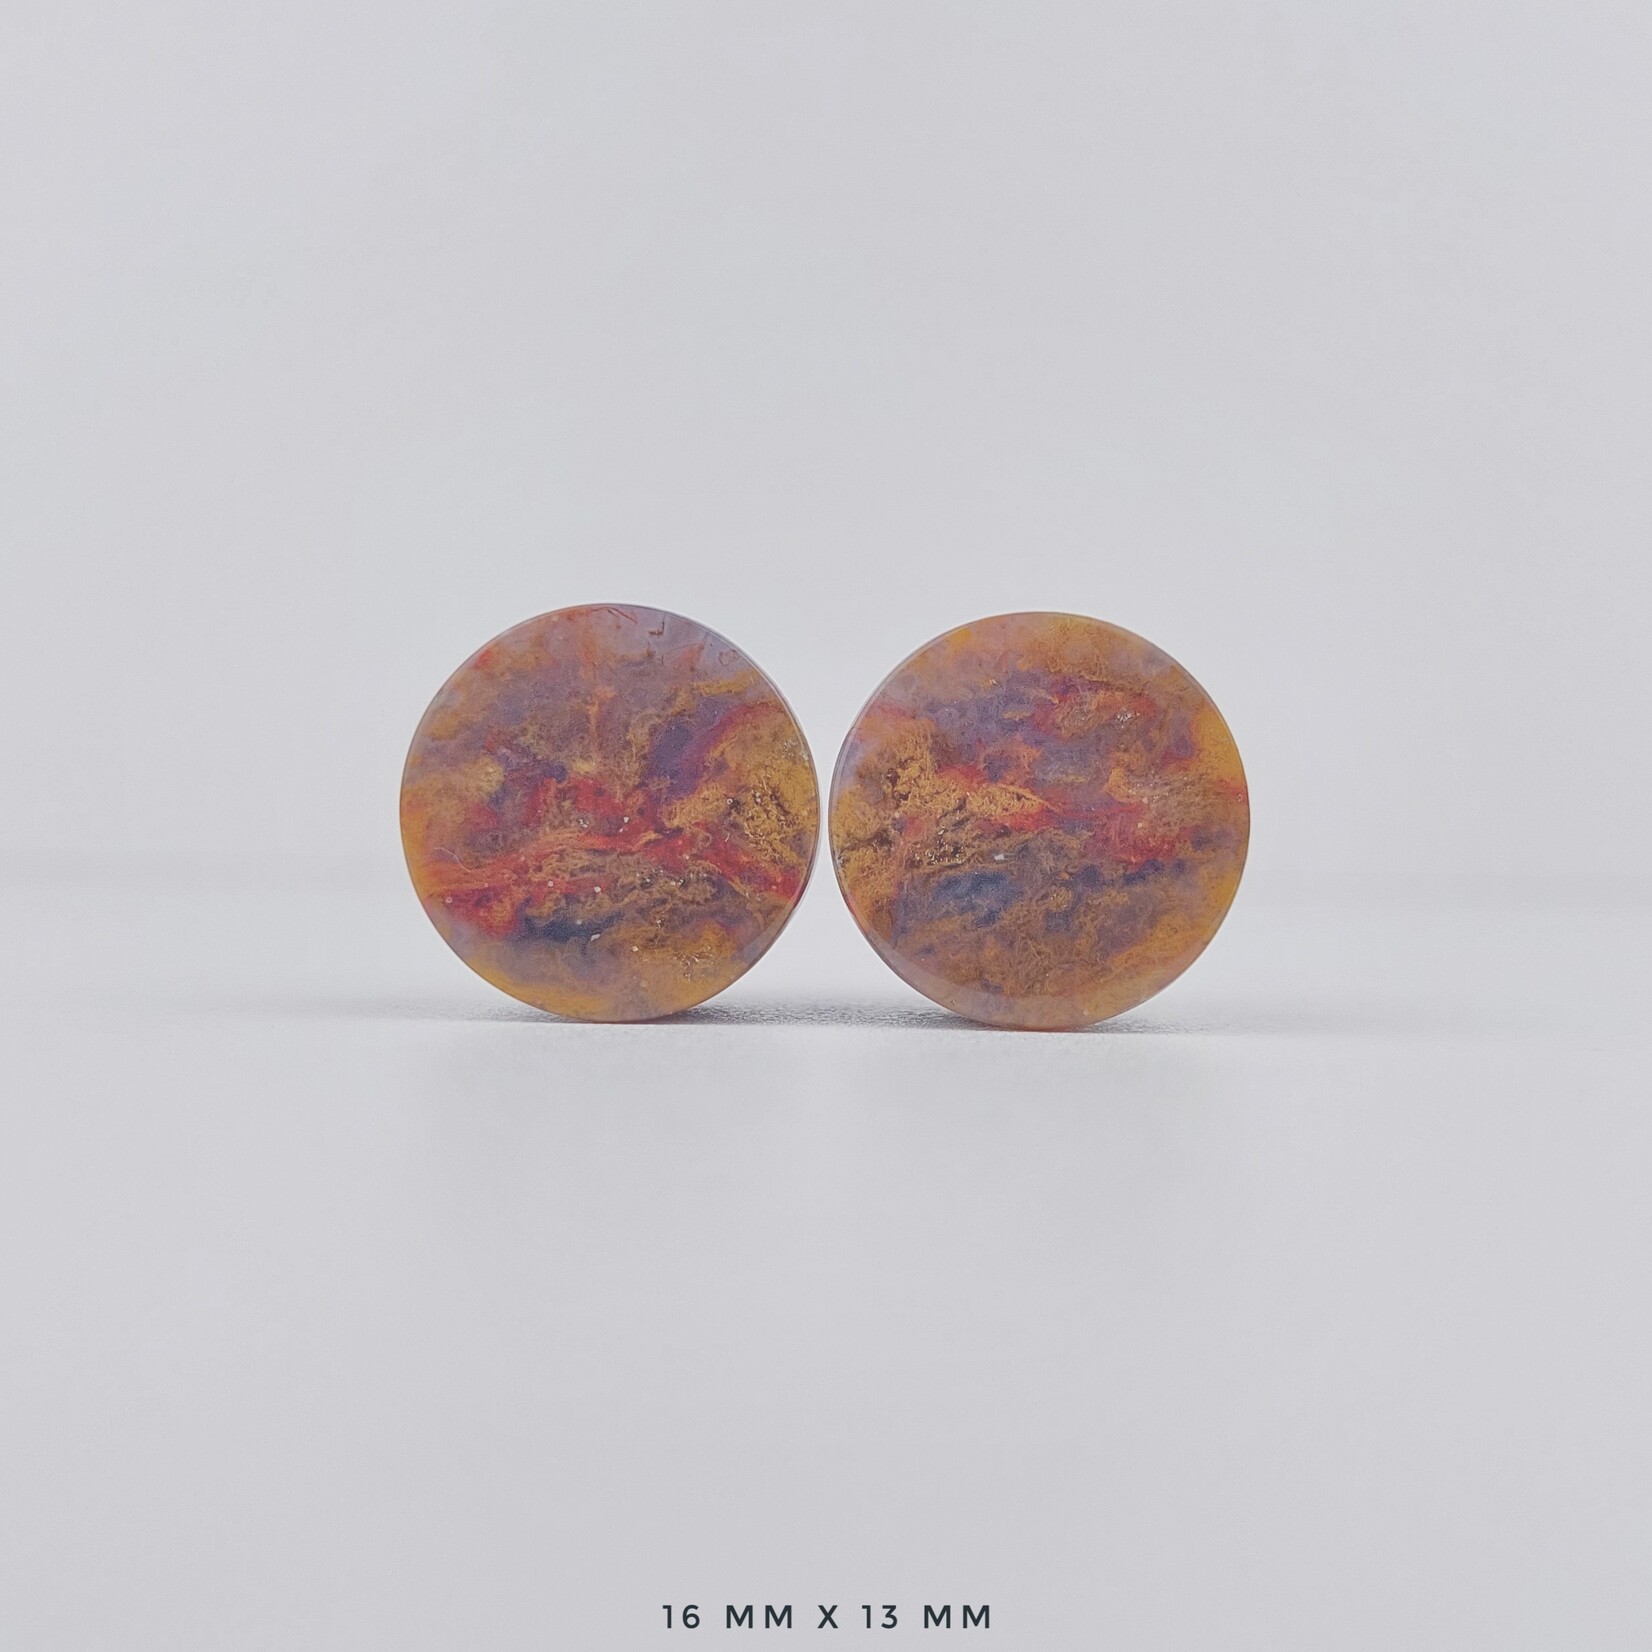 Grit Lapidary Grit Lapidary premium double flared Red Moss Agate plugs